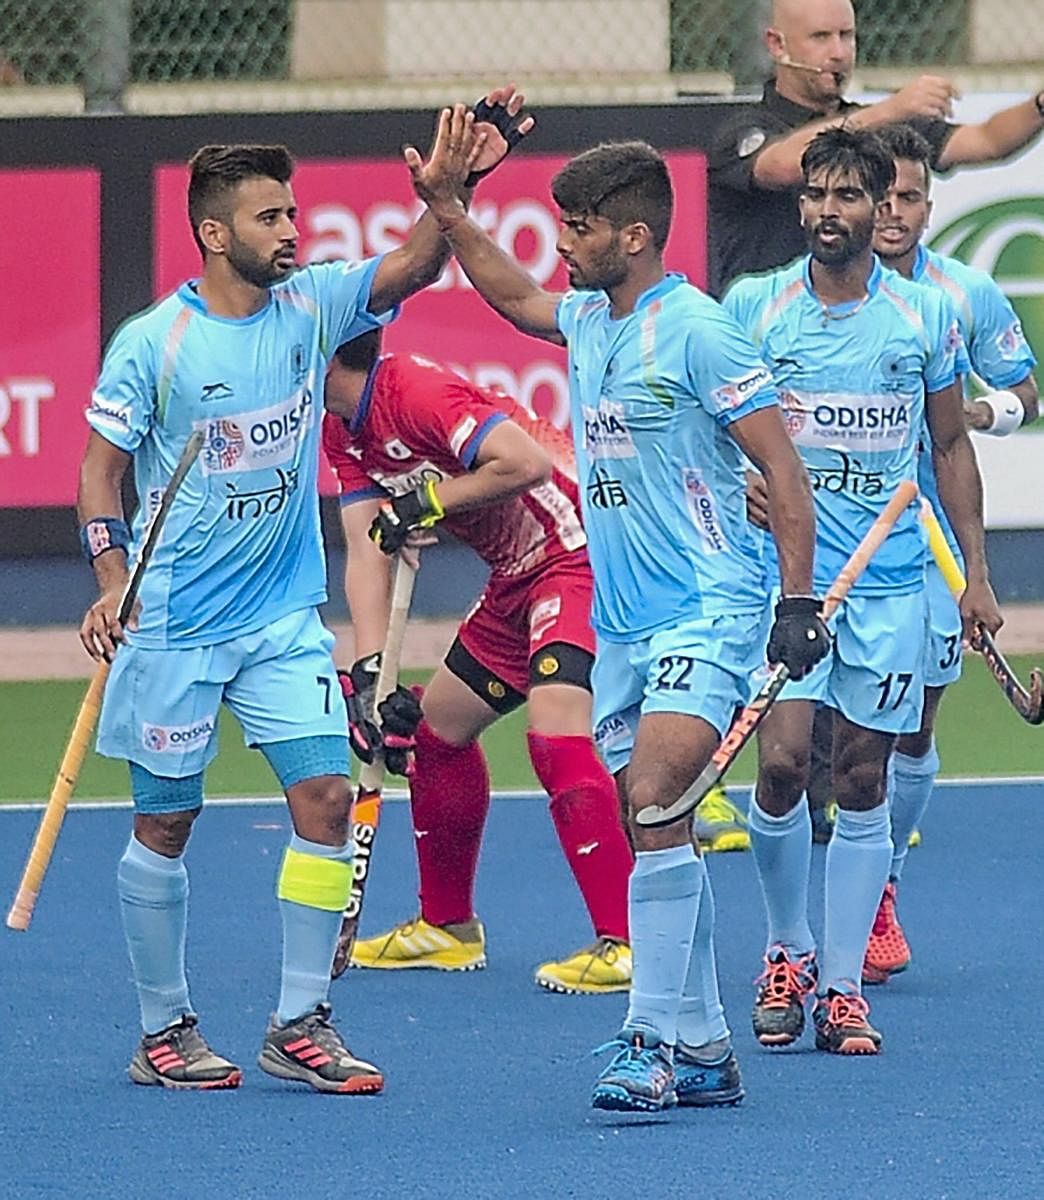 Hockey player Varun Kumar celebrates after converting a penalty corner as India defeats Japan 2-0 in the first match of Sultan Azlan Shah Cup hockey tournament, in Ipoh Malaysia. PTI/file